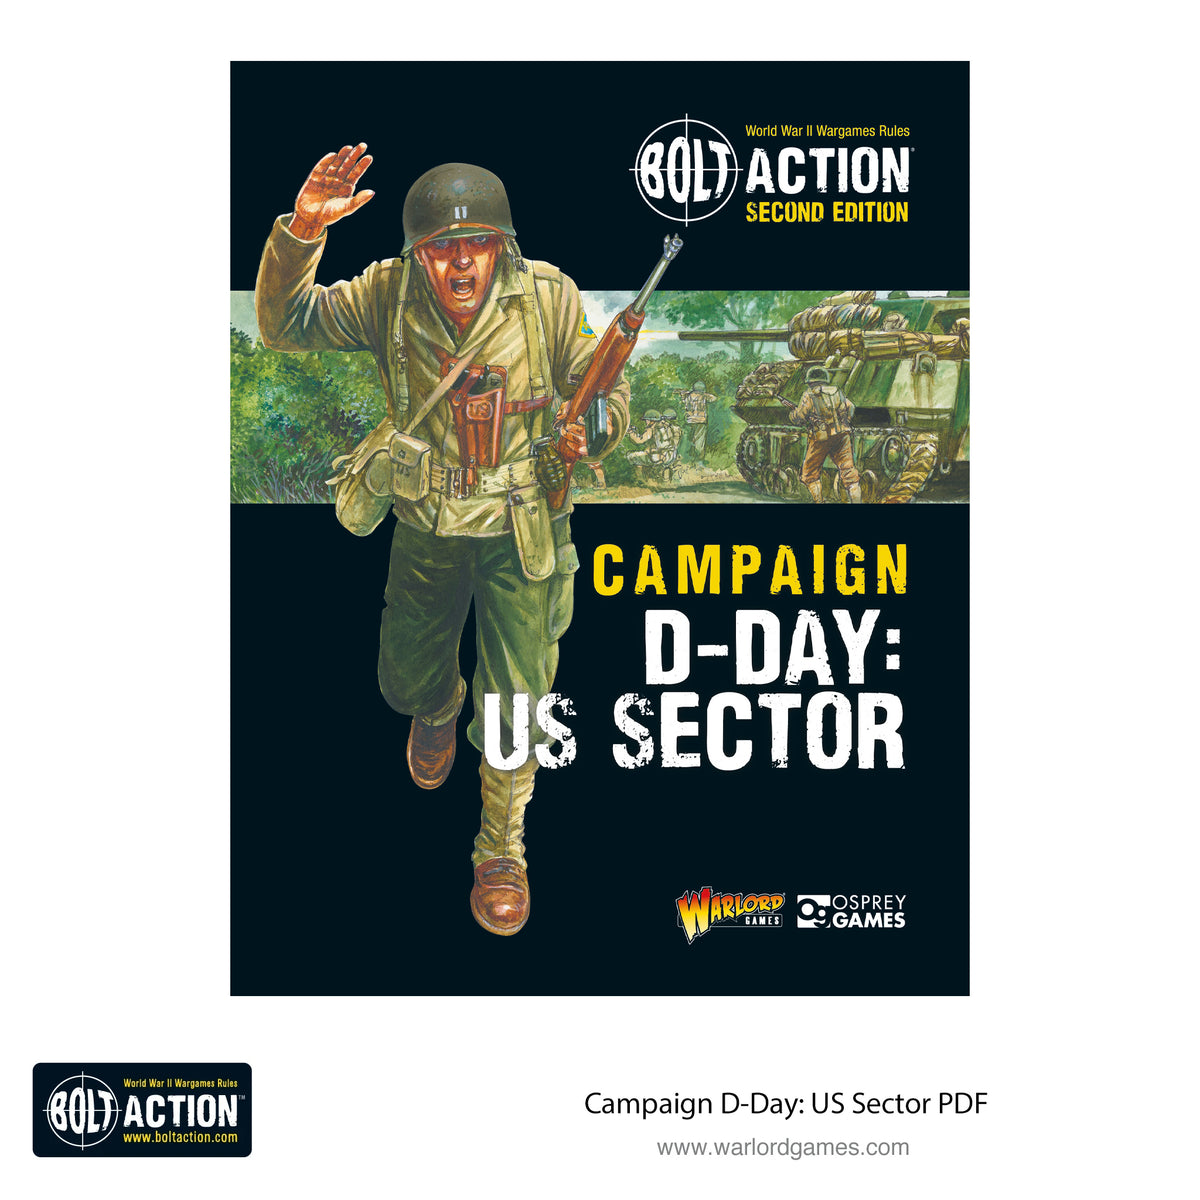 Digital D-Day: The US Sector campaign book PDF